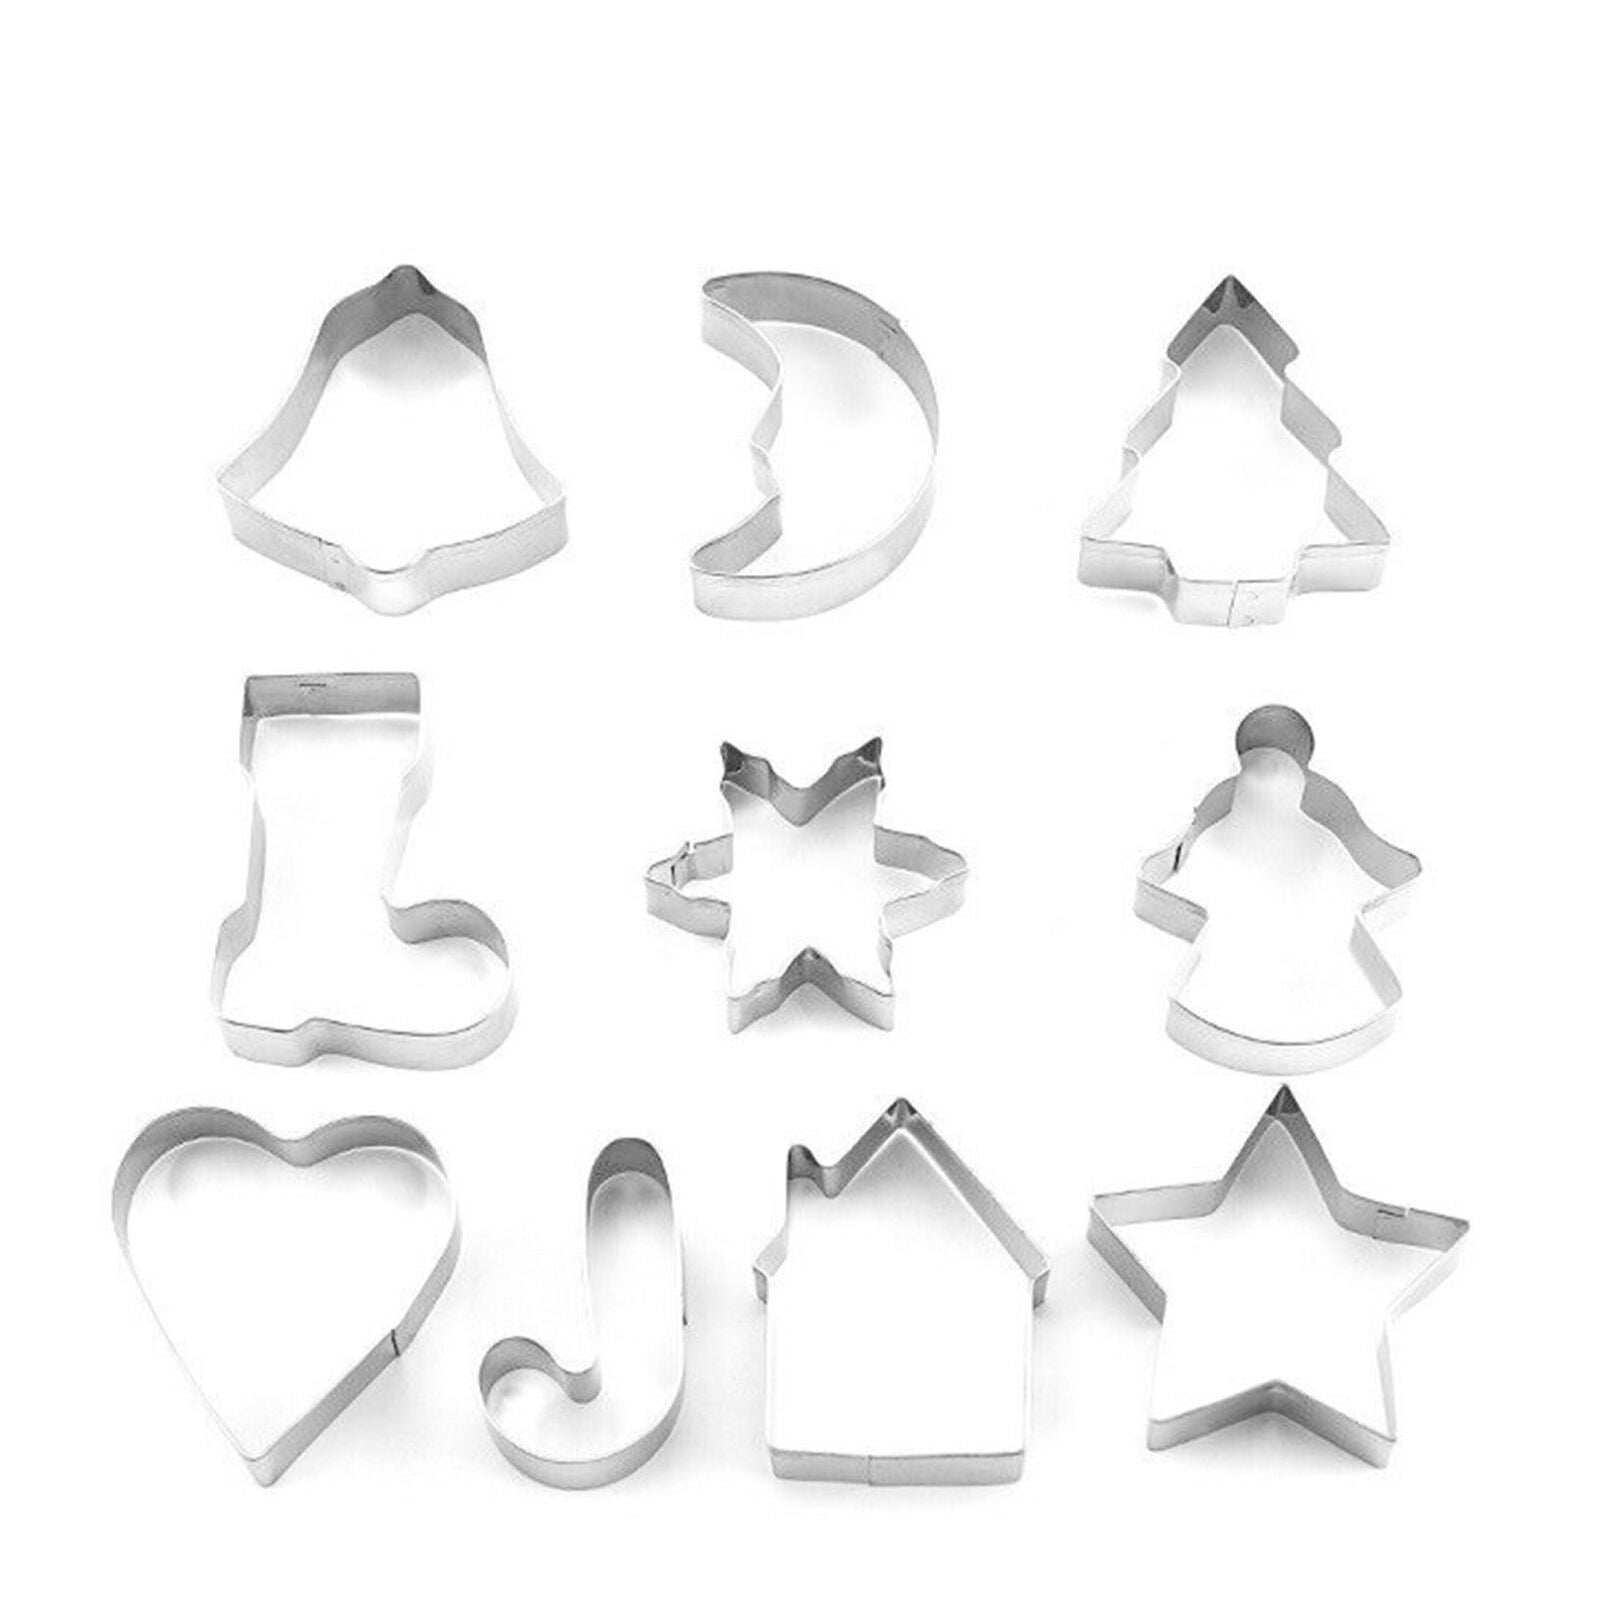 Christmas Cake Mold Cookie Cutter Biscuit Cutter Angel Star Tree Bell Stocking